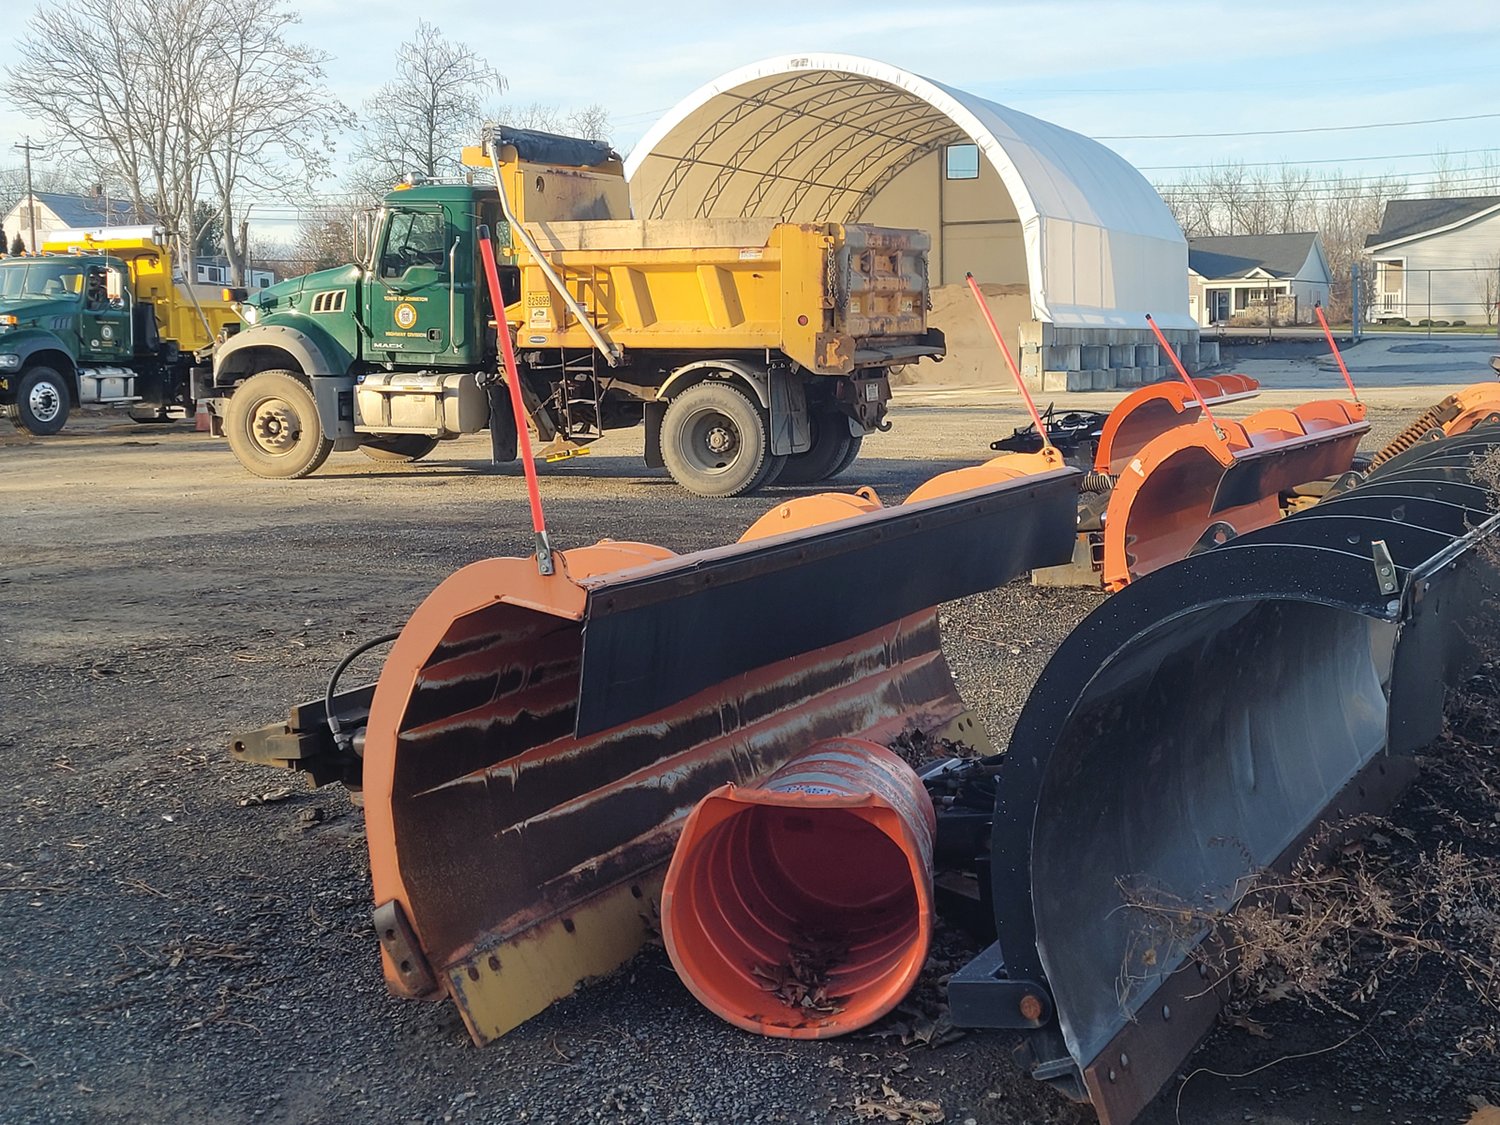 SNOW PREP: Johnston town officials want to be ready when snow hits this winter. Preparations were underway at the DPW yard early this week, in anticipation of the season's first significant snowfall. Mayor Joseph Polisena said the town needs to hear from interested private plow drivers.